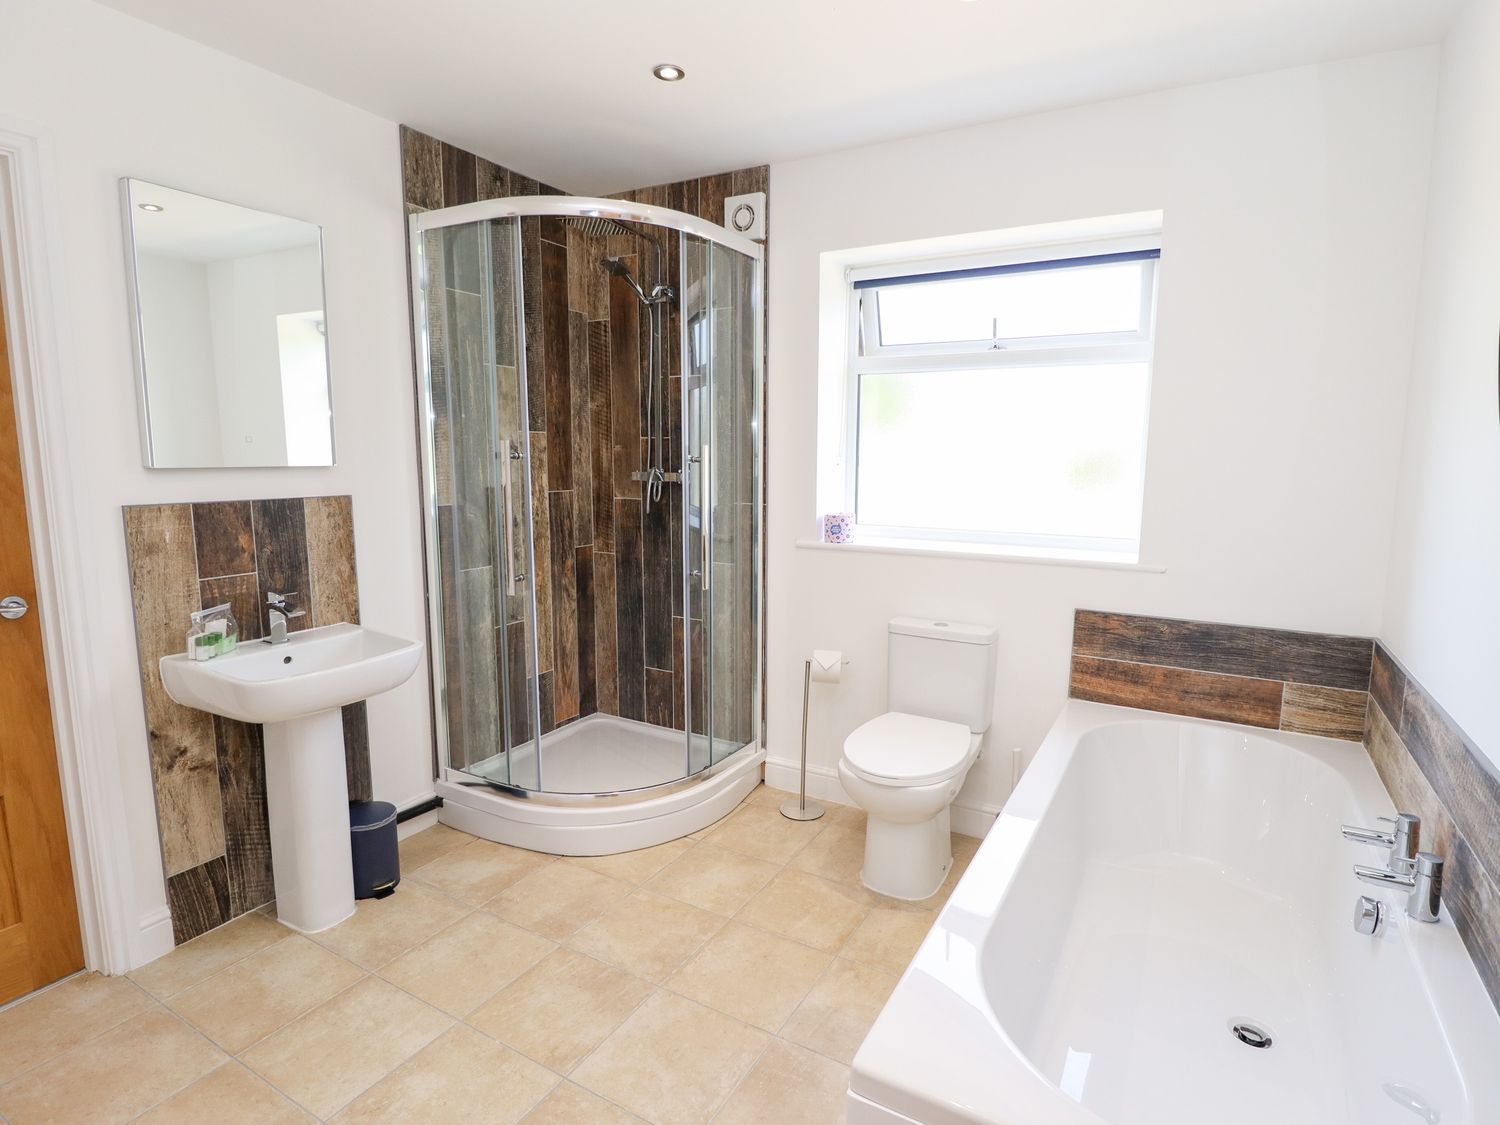 Lodge 24 is near South Hykeham, in Lincolnshire. Four-bedroom lodge with hot tub and private balcony